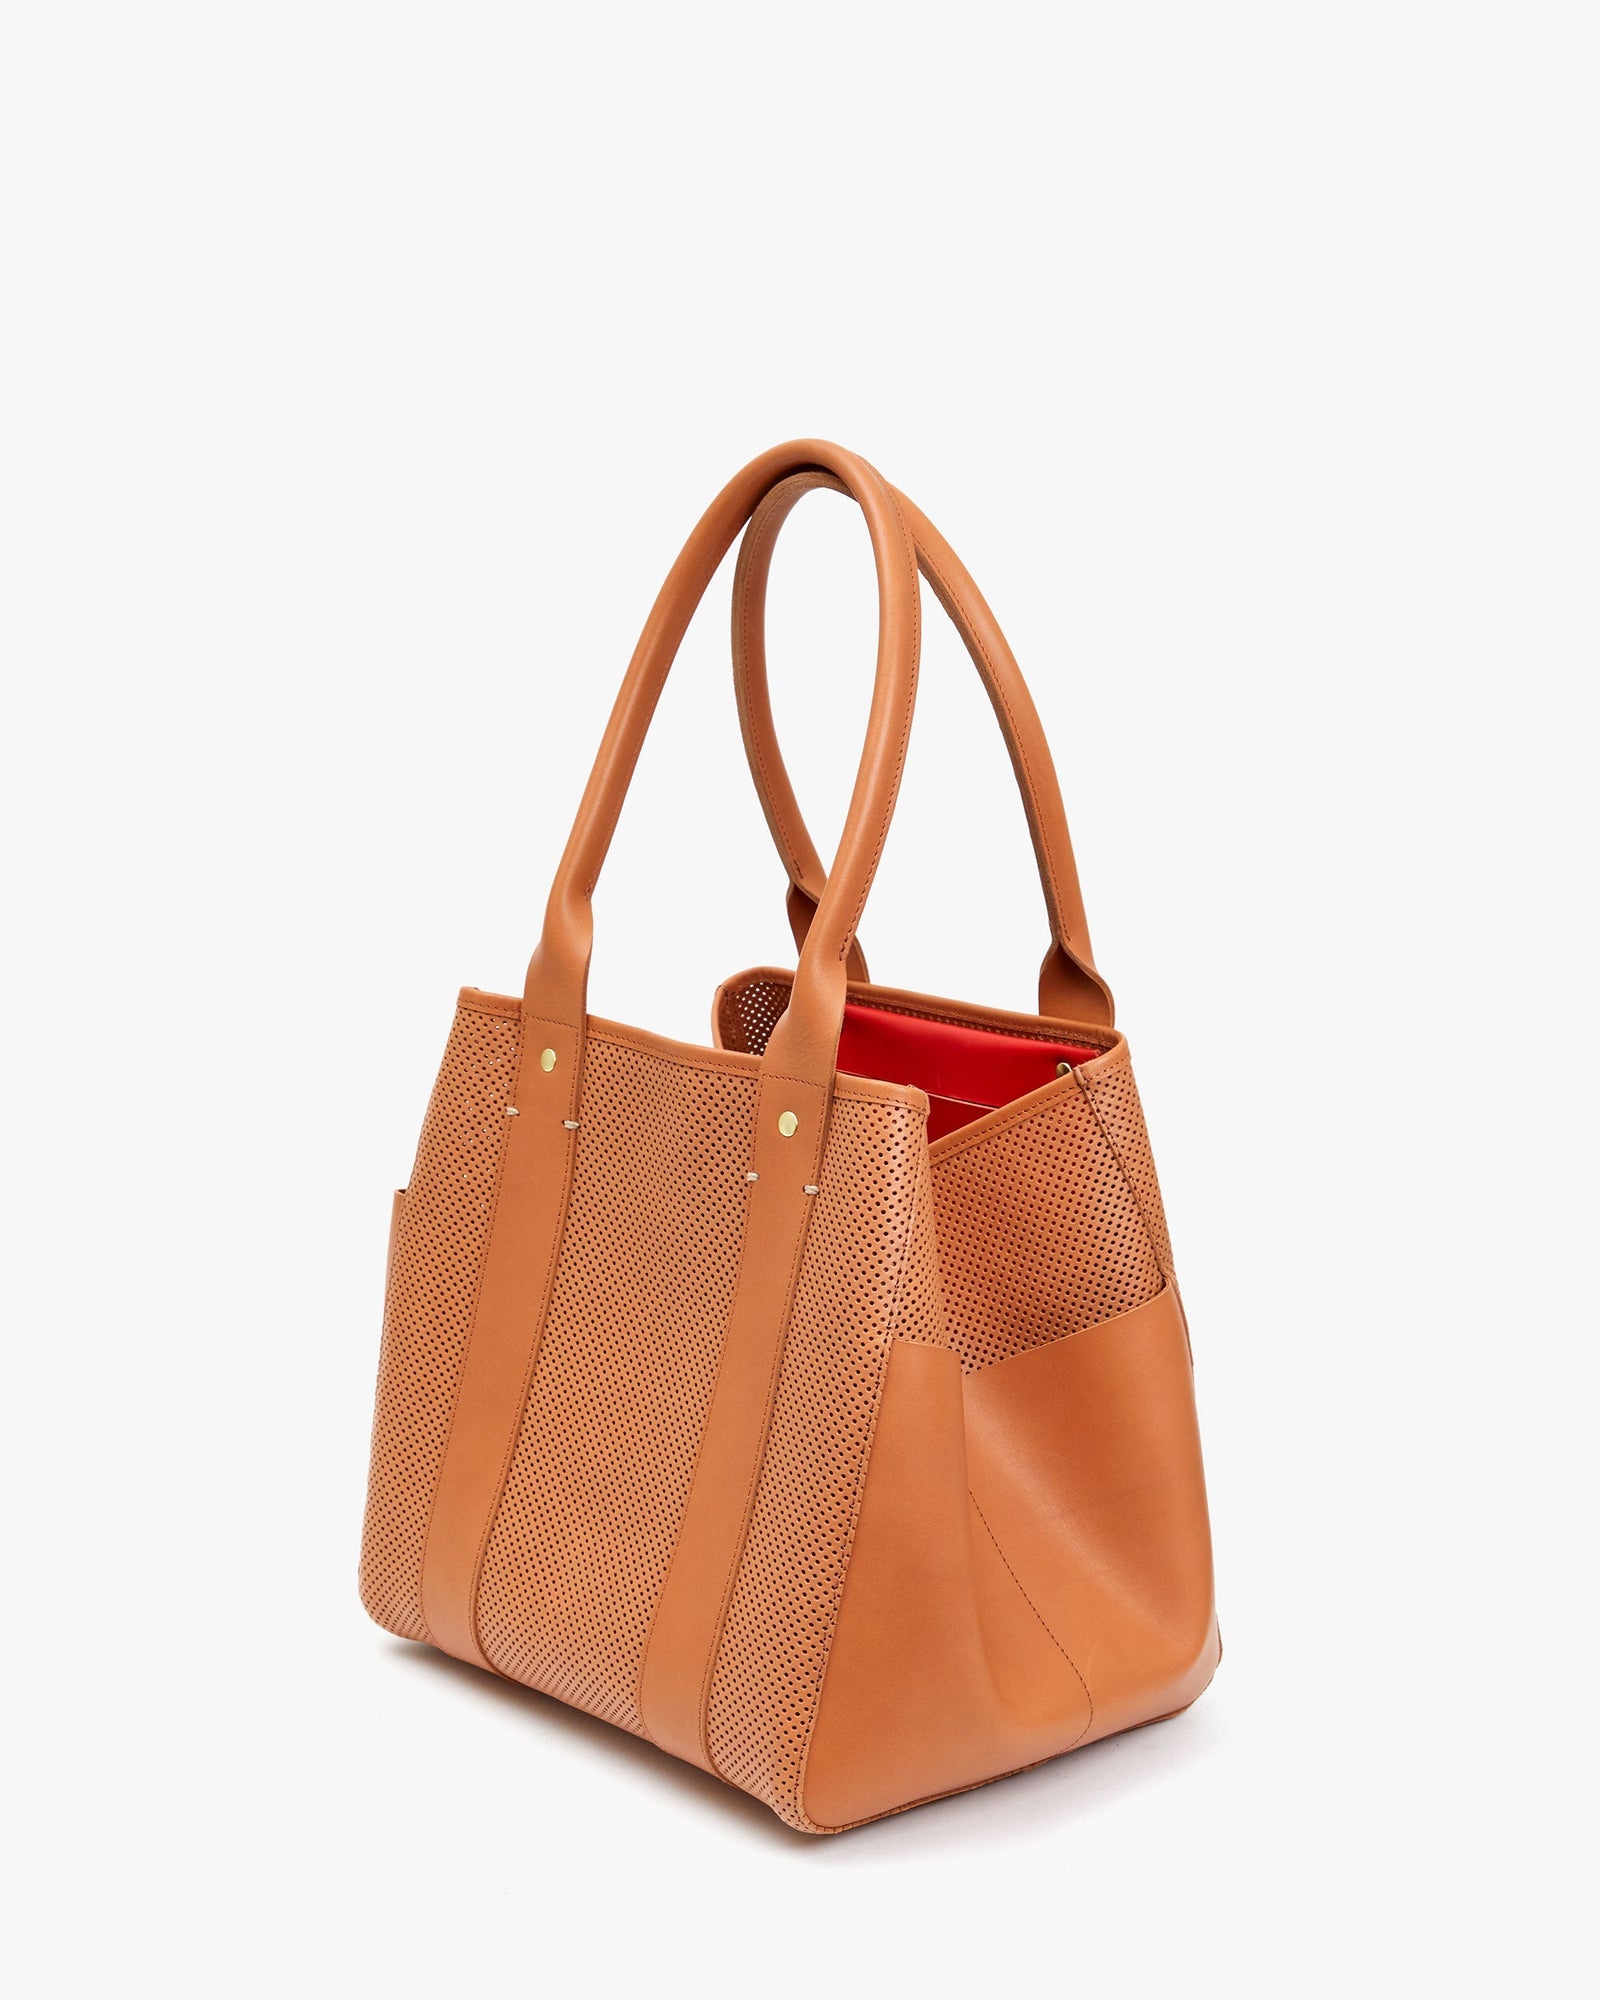 Cuoio Perf Le Box Tote with sides collapsed